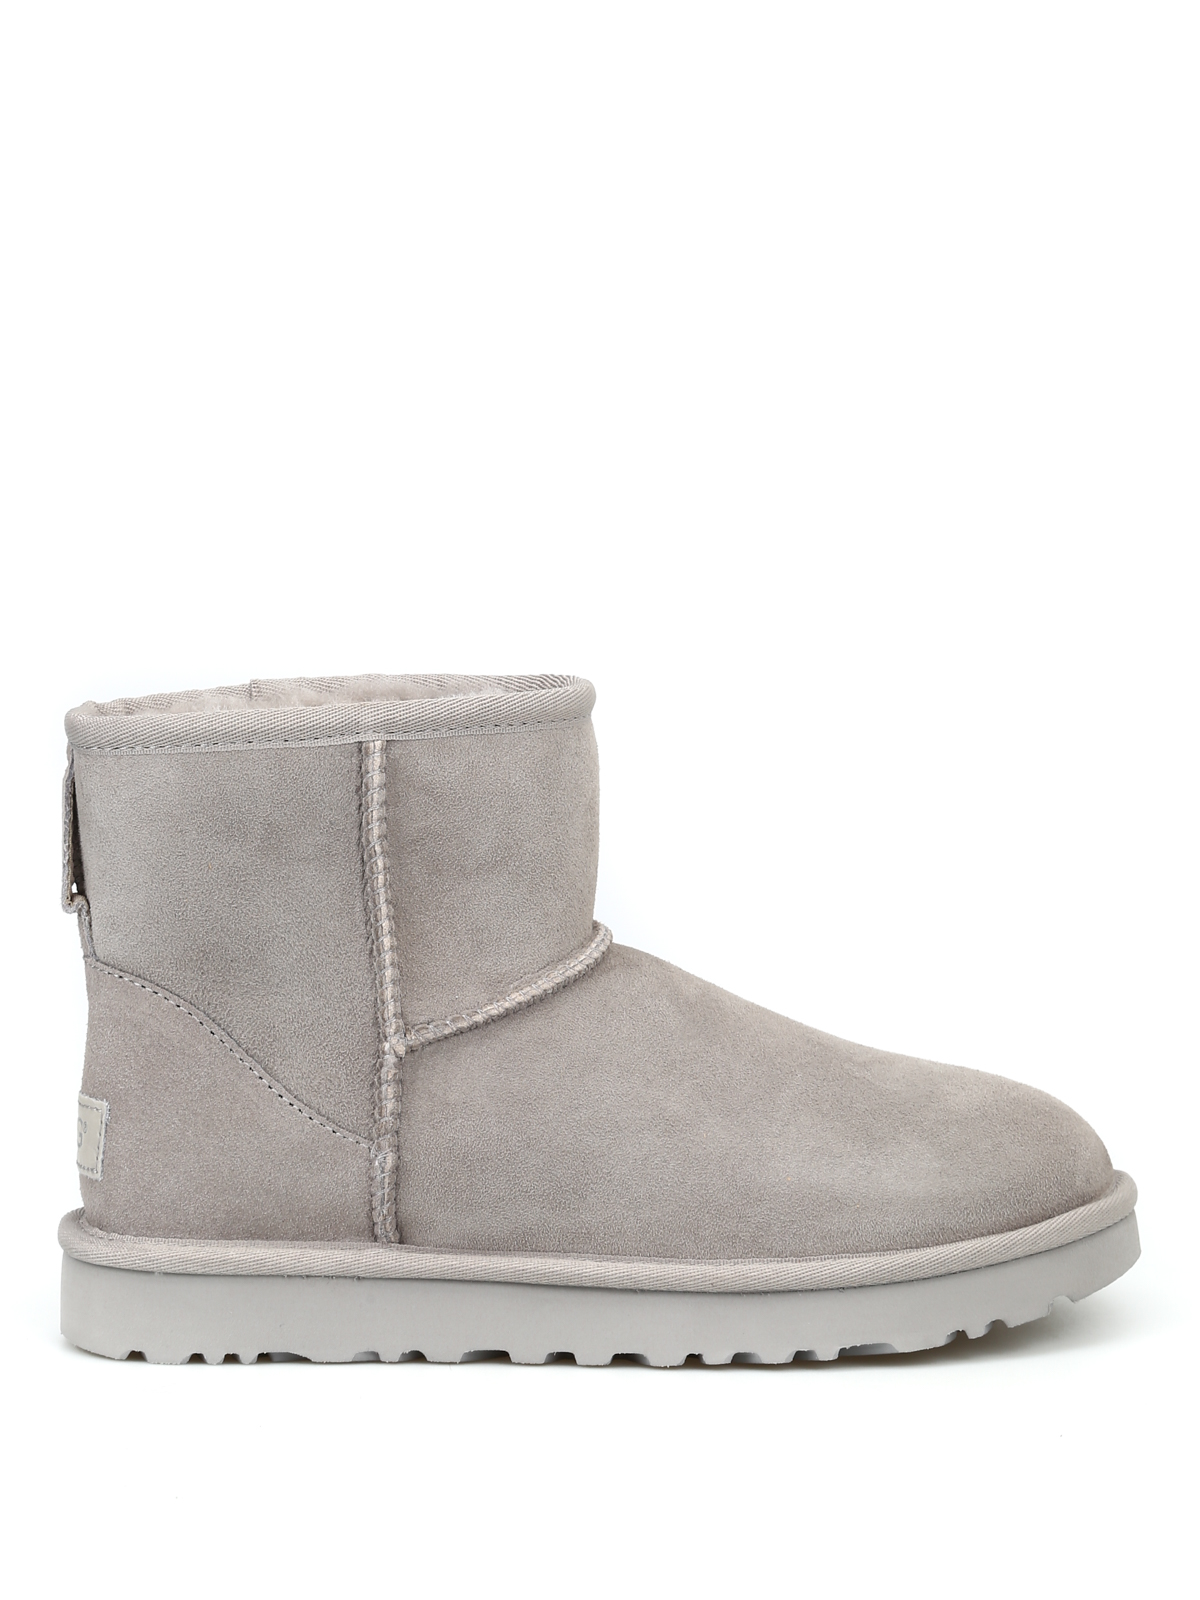 Ugg Classic Mini Ii Seal Ankle Boots In 